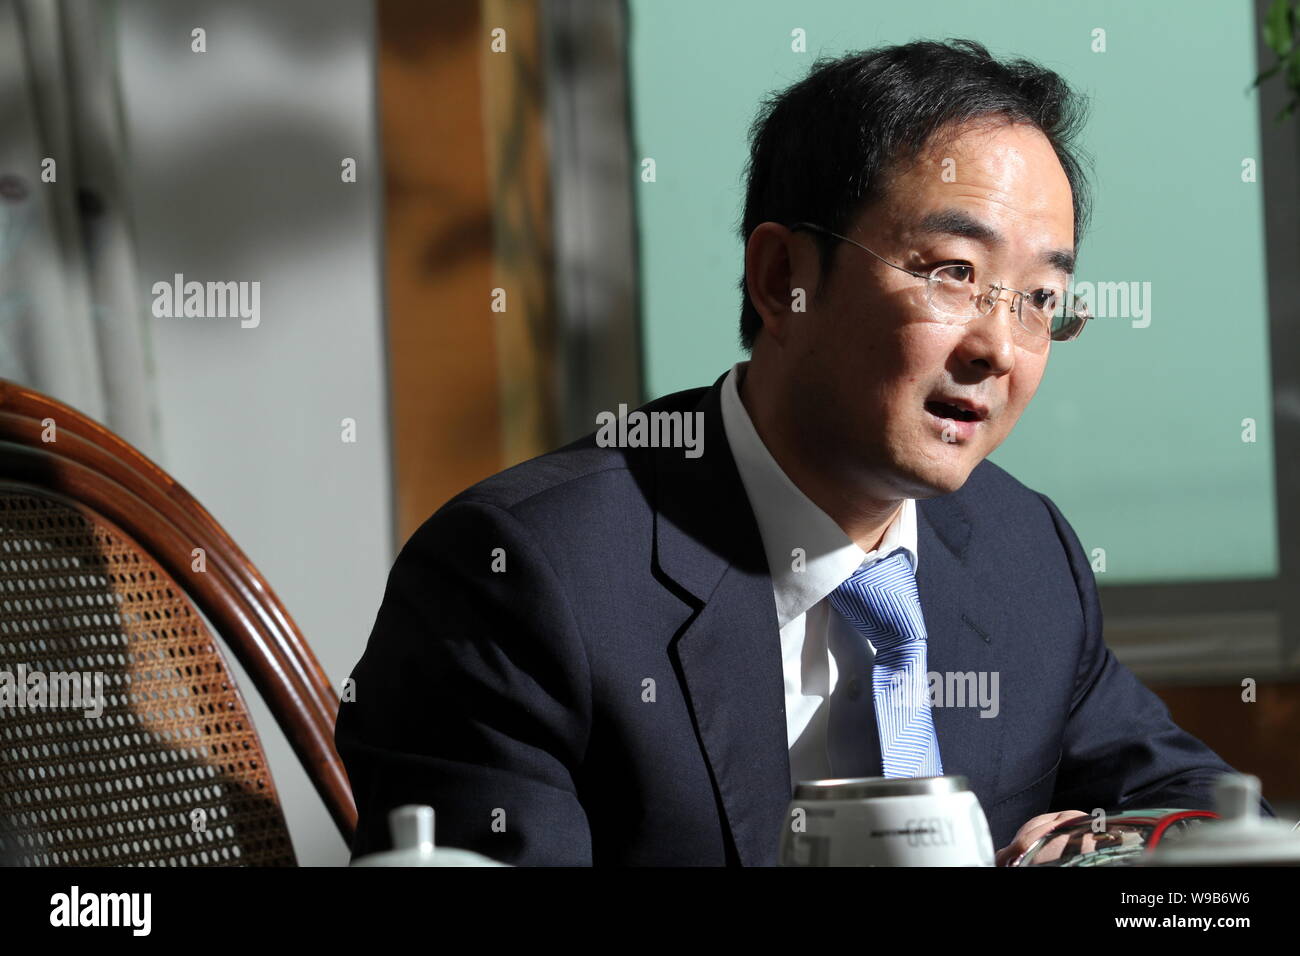 An Conghui, Vice President of Geely Holding Group and General Manager of Zhejiang Geely Automobile Co., Ltd., speaks during an interview at the headqu Stock Photo